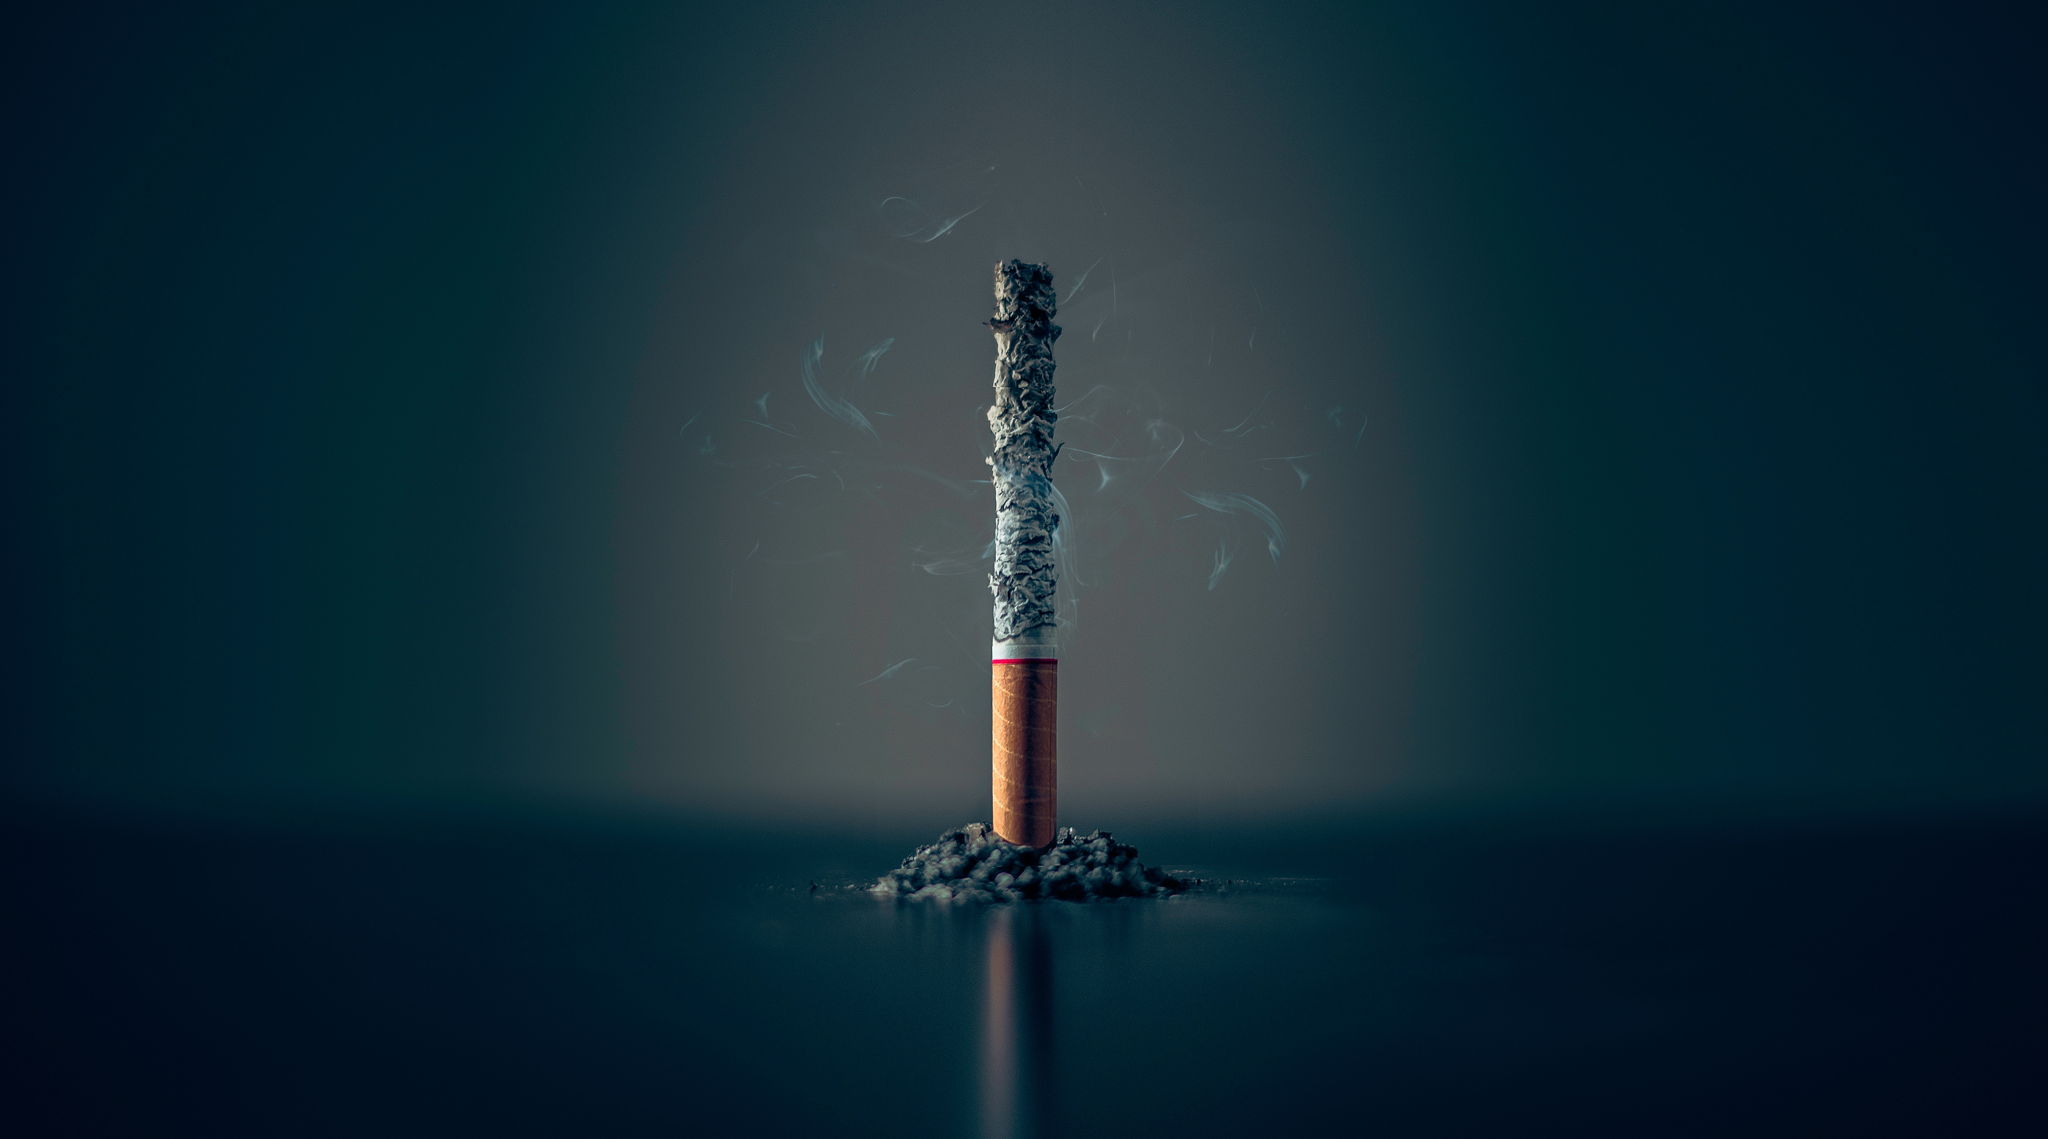 Tobaccon and impact your finances negatively. Source: Unsplash.